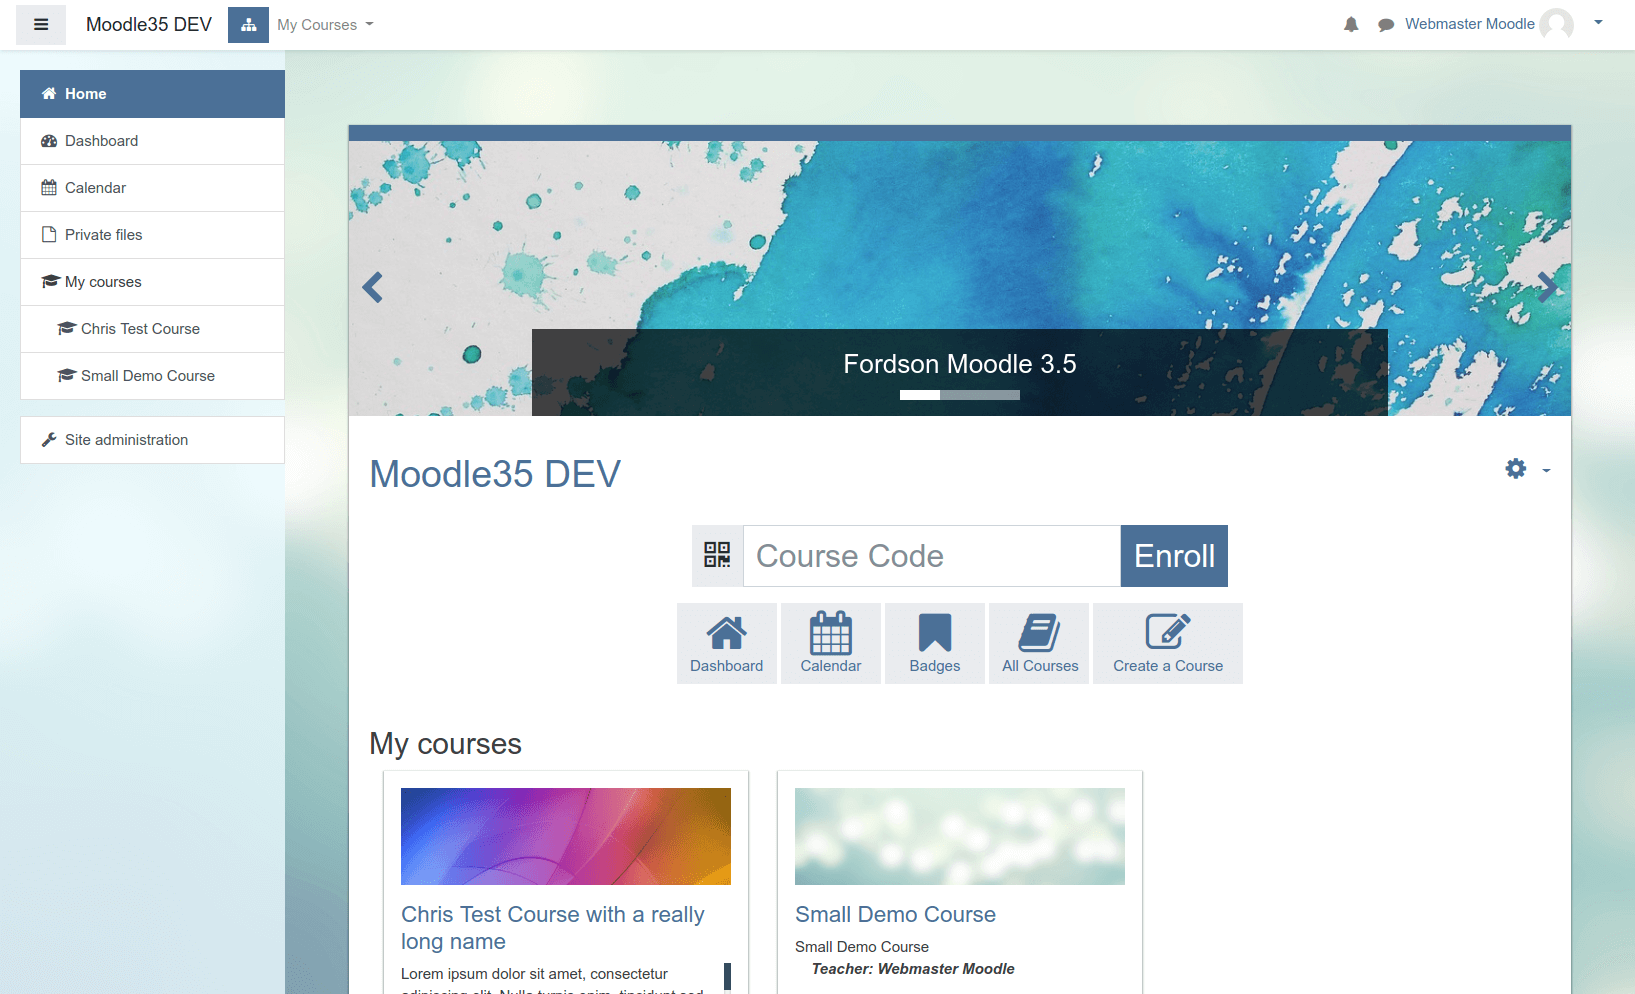 Best Moodle Themes 2019 - Fordson